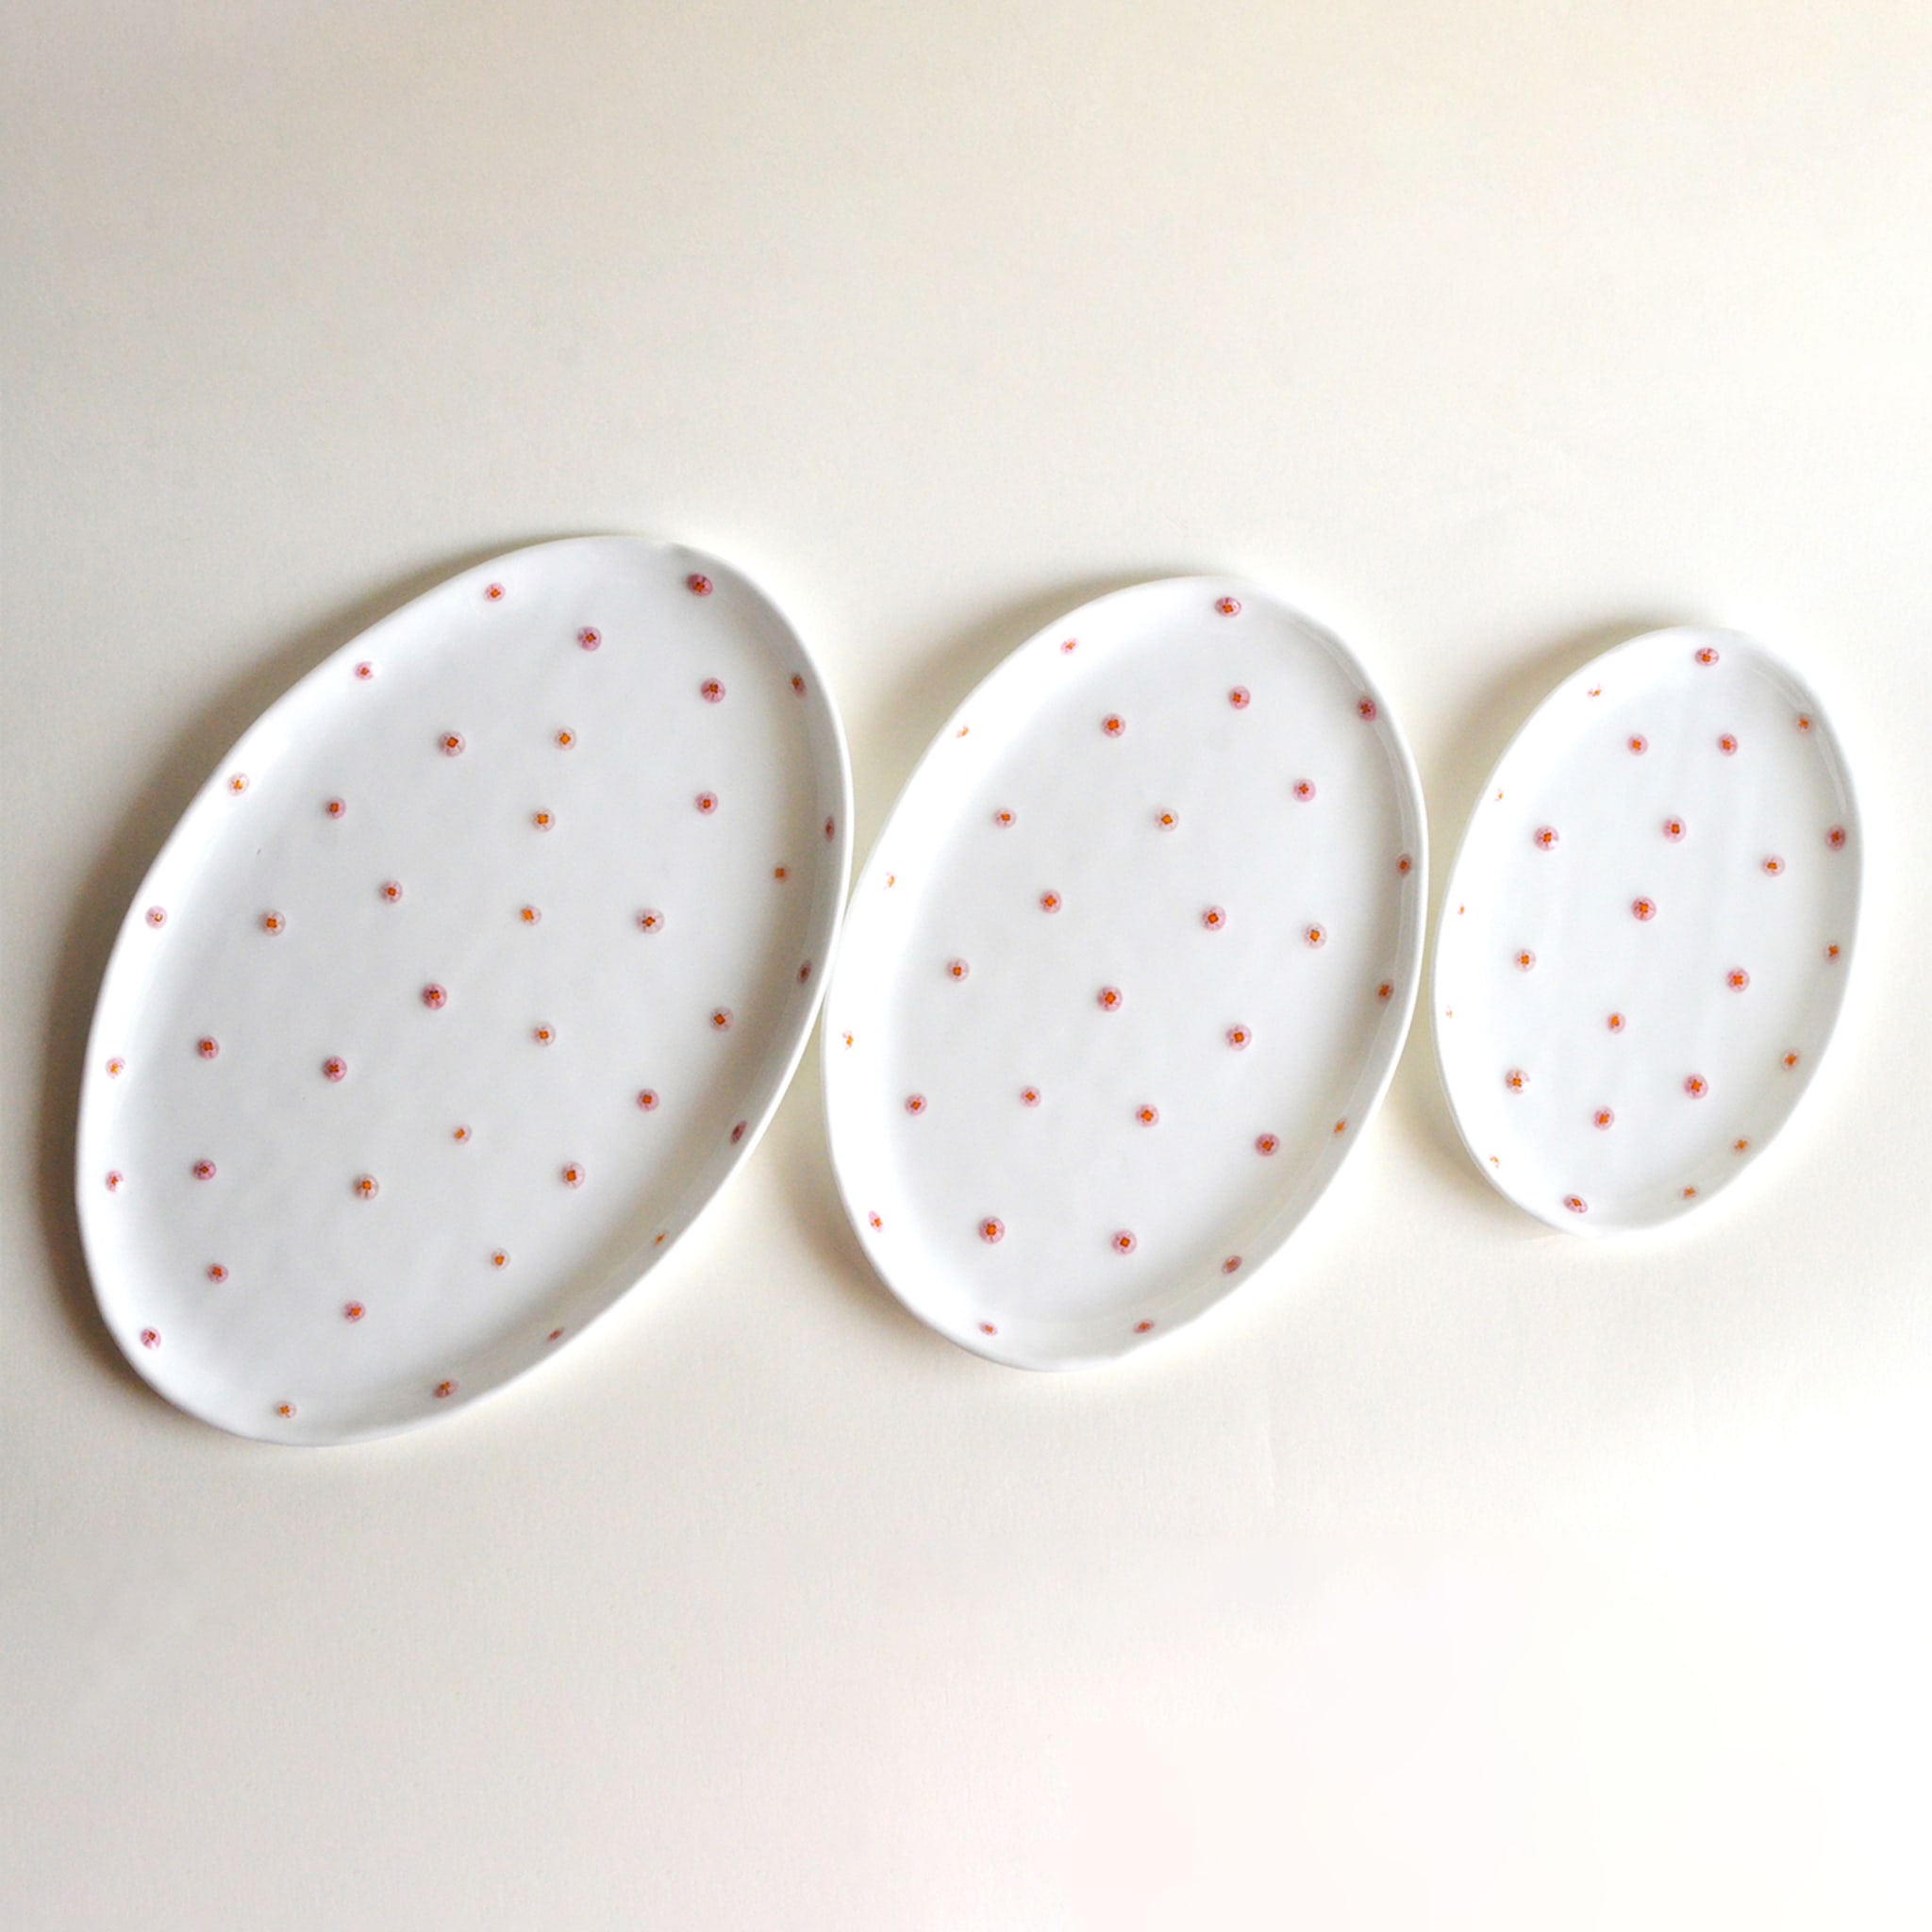 Set Of 4 White Glass Plates with pink murrini inlays - Alternative view 2